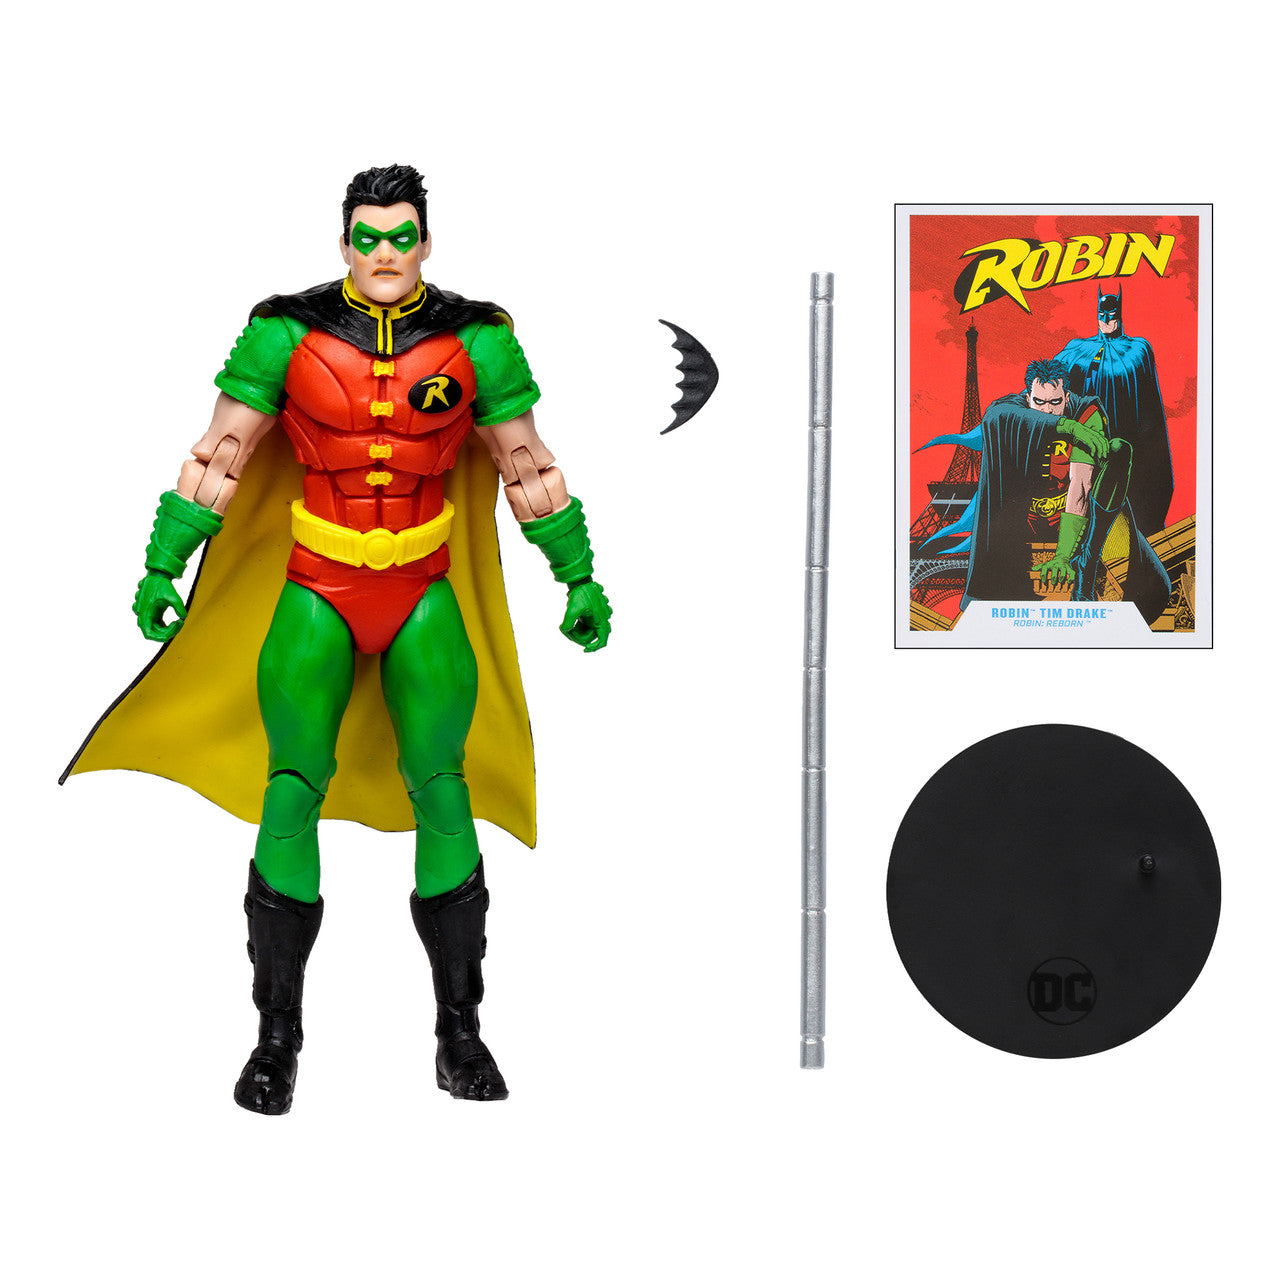 Robin Tim Drake Action Figure Toy with accessories - Heretoserveyou